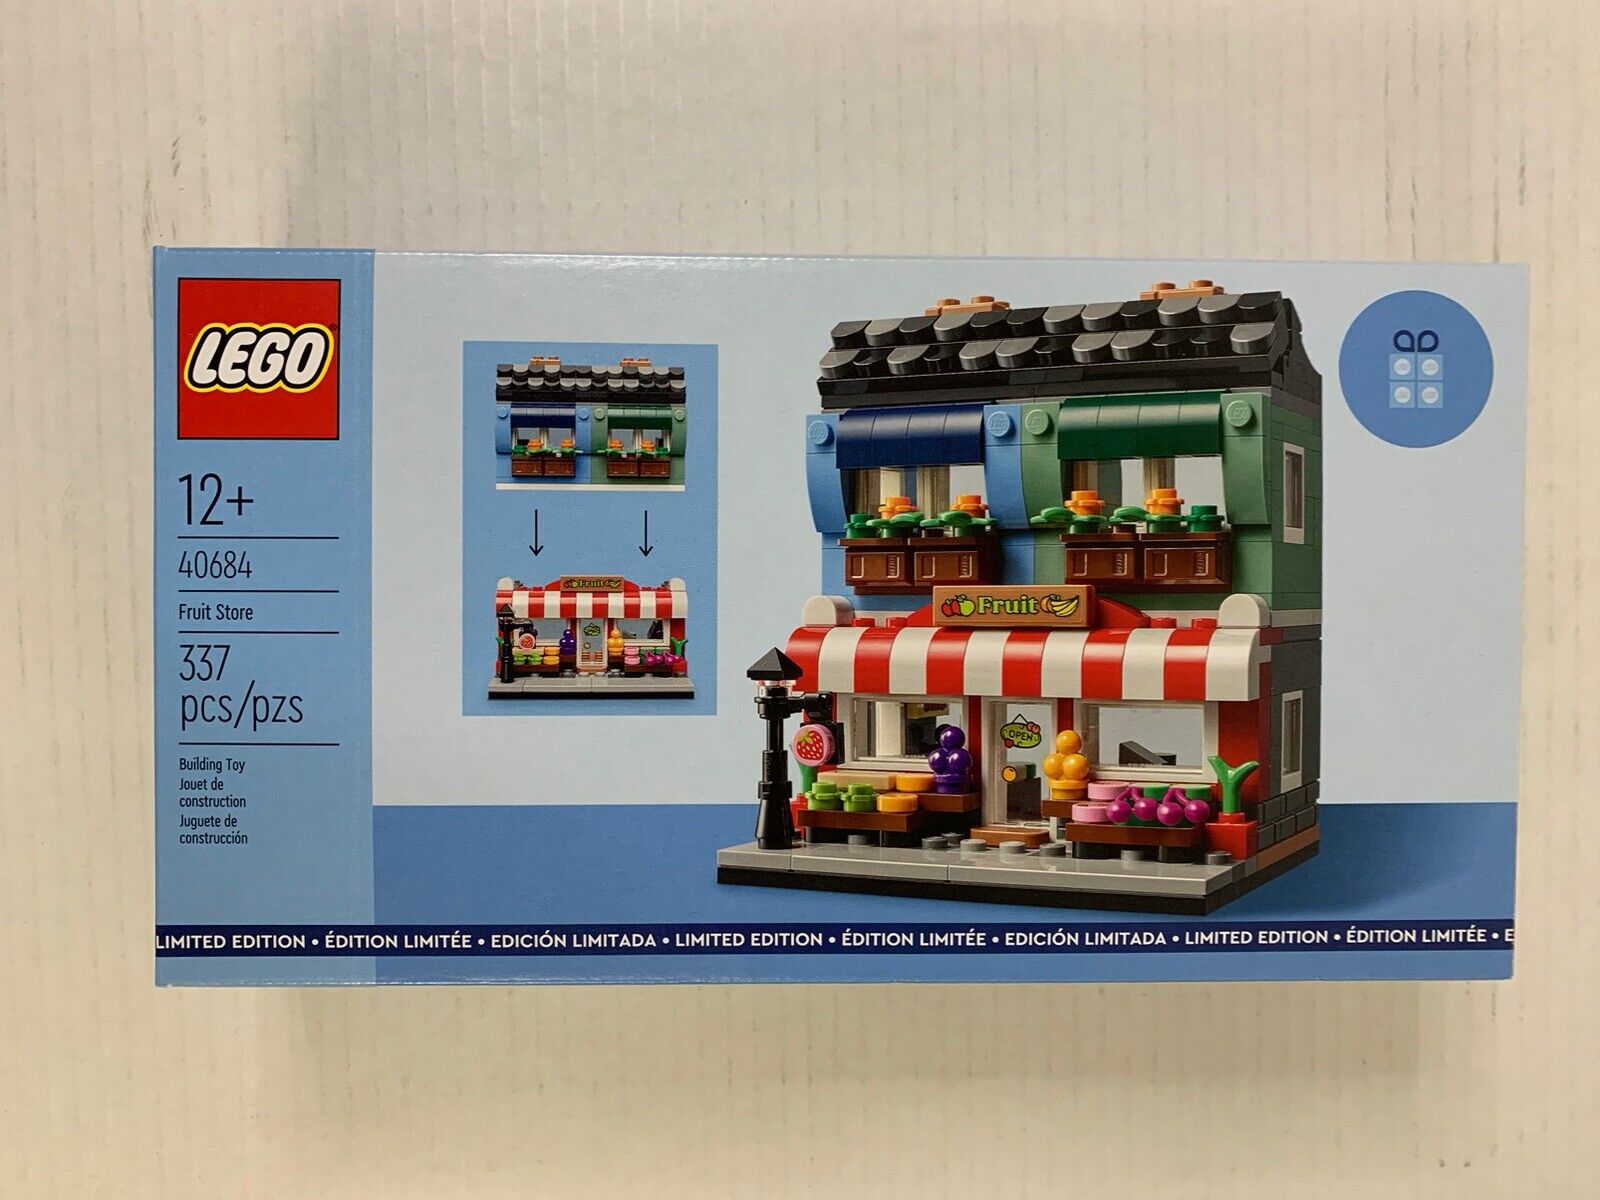 Lego 40684 Fruit Store Limited Edition - New Factory Sealed - Ready to ship